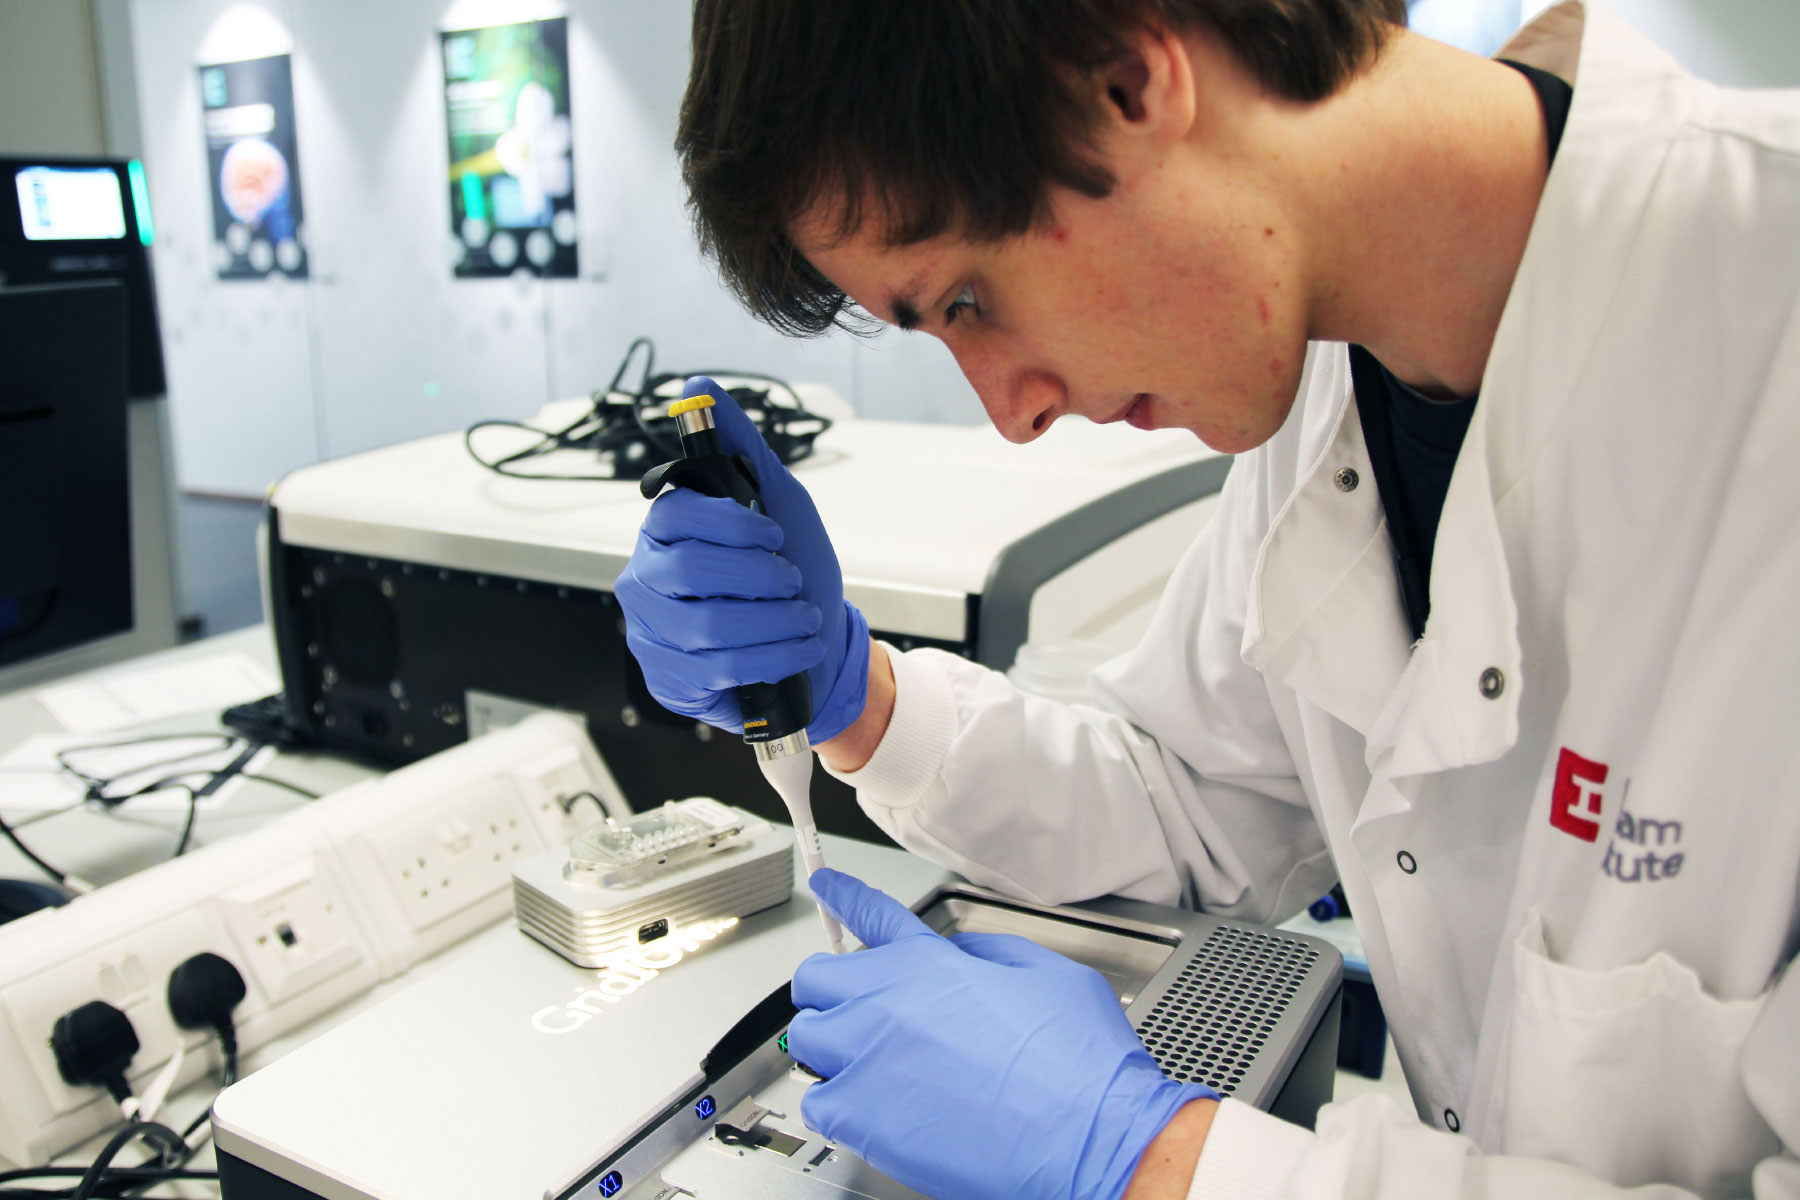 The experience of completing a Nuffield Research Placement at EI has encouraged Thomas to focus more on bioinformatics